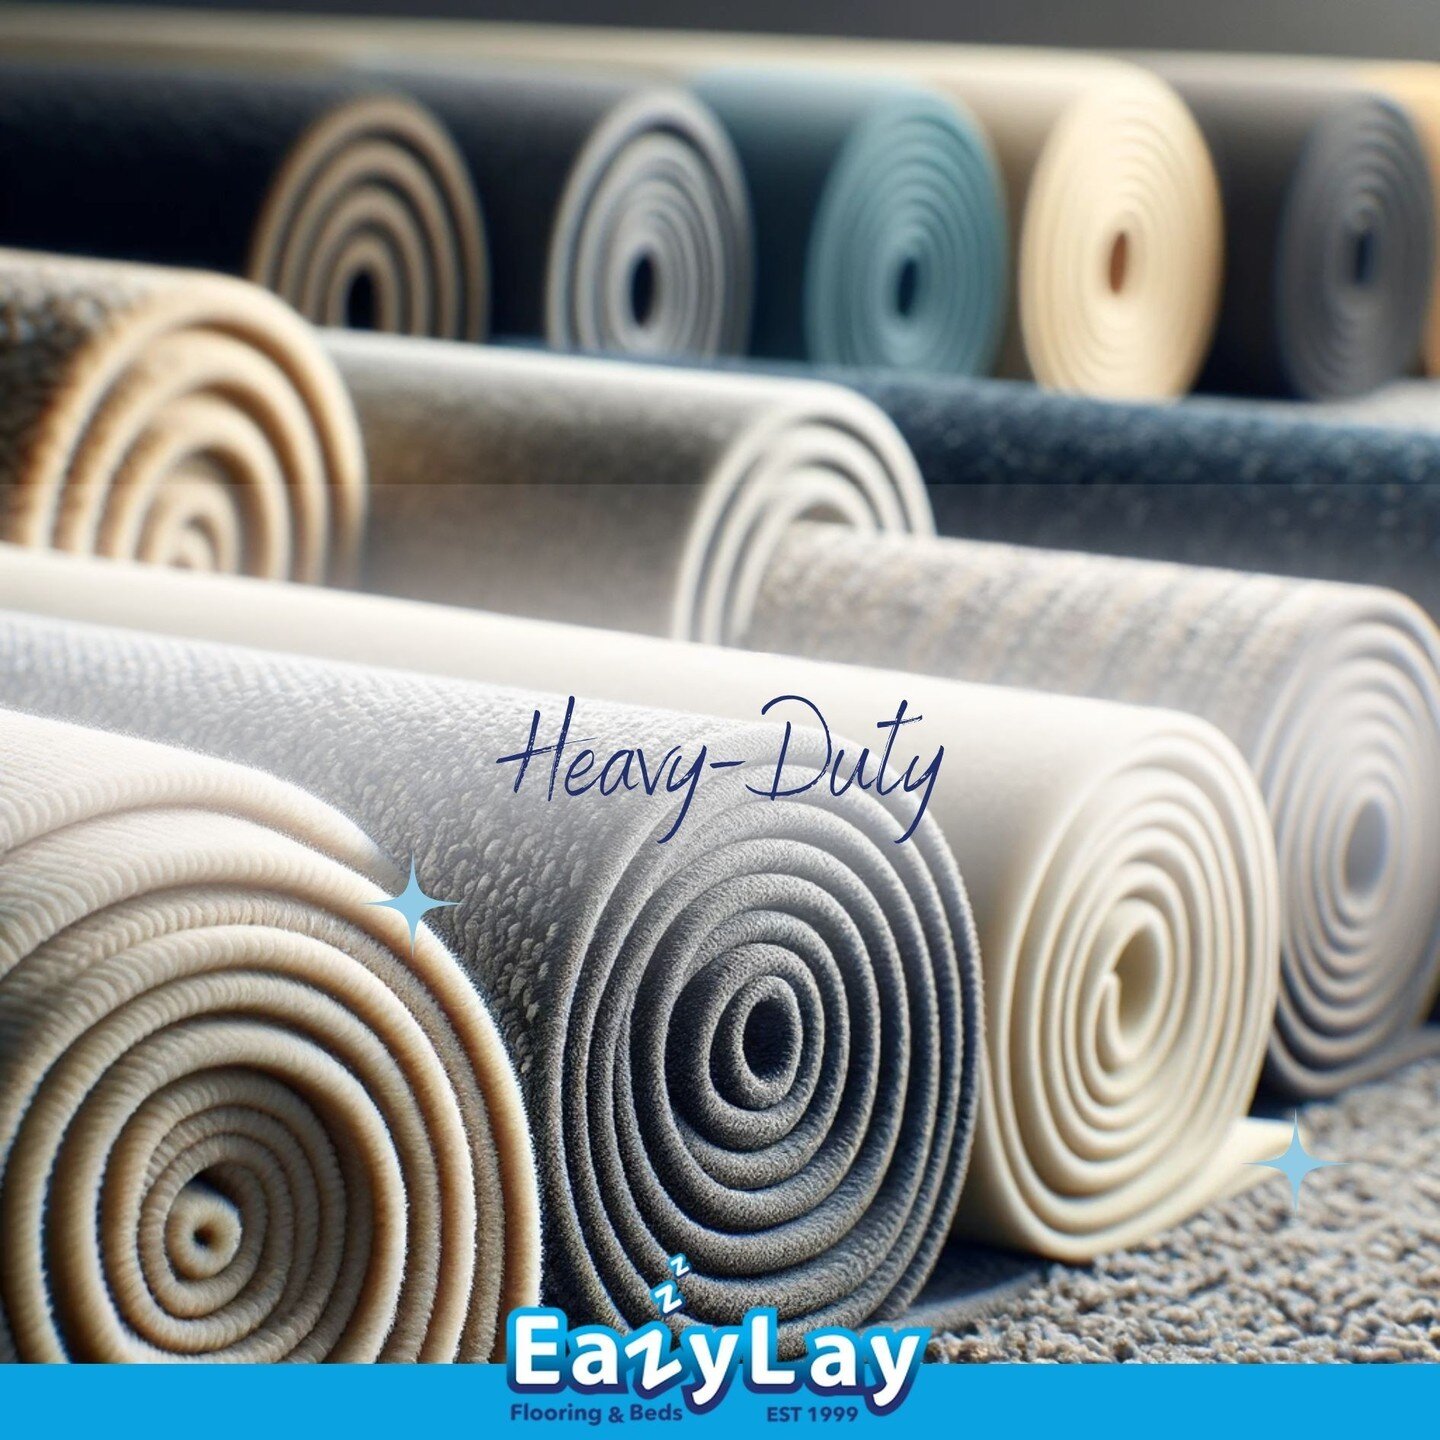 Introducing our heavy-duty roll carpets &ndash; built tough and stain-free for your peace of mind. Elevate your space with style and durability. #HeavyDutyCarpets #StainFree #ElevateYourSpace&quot; 🏡✨